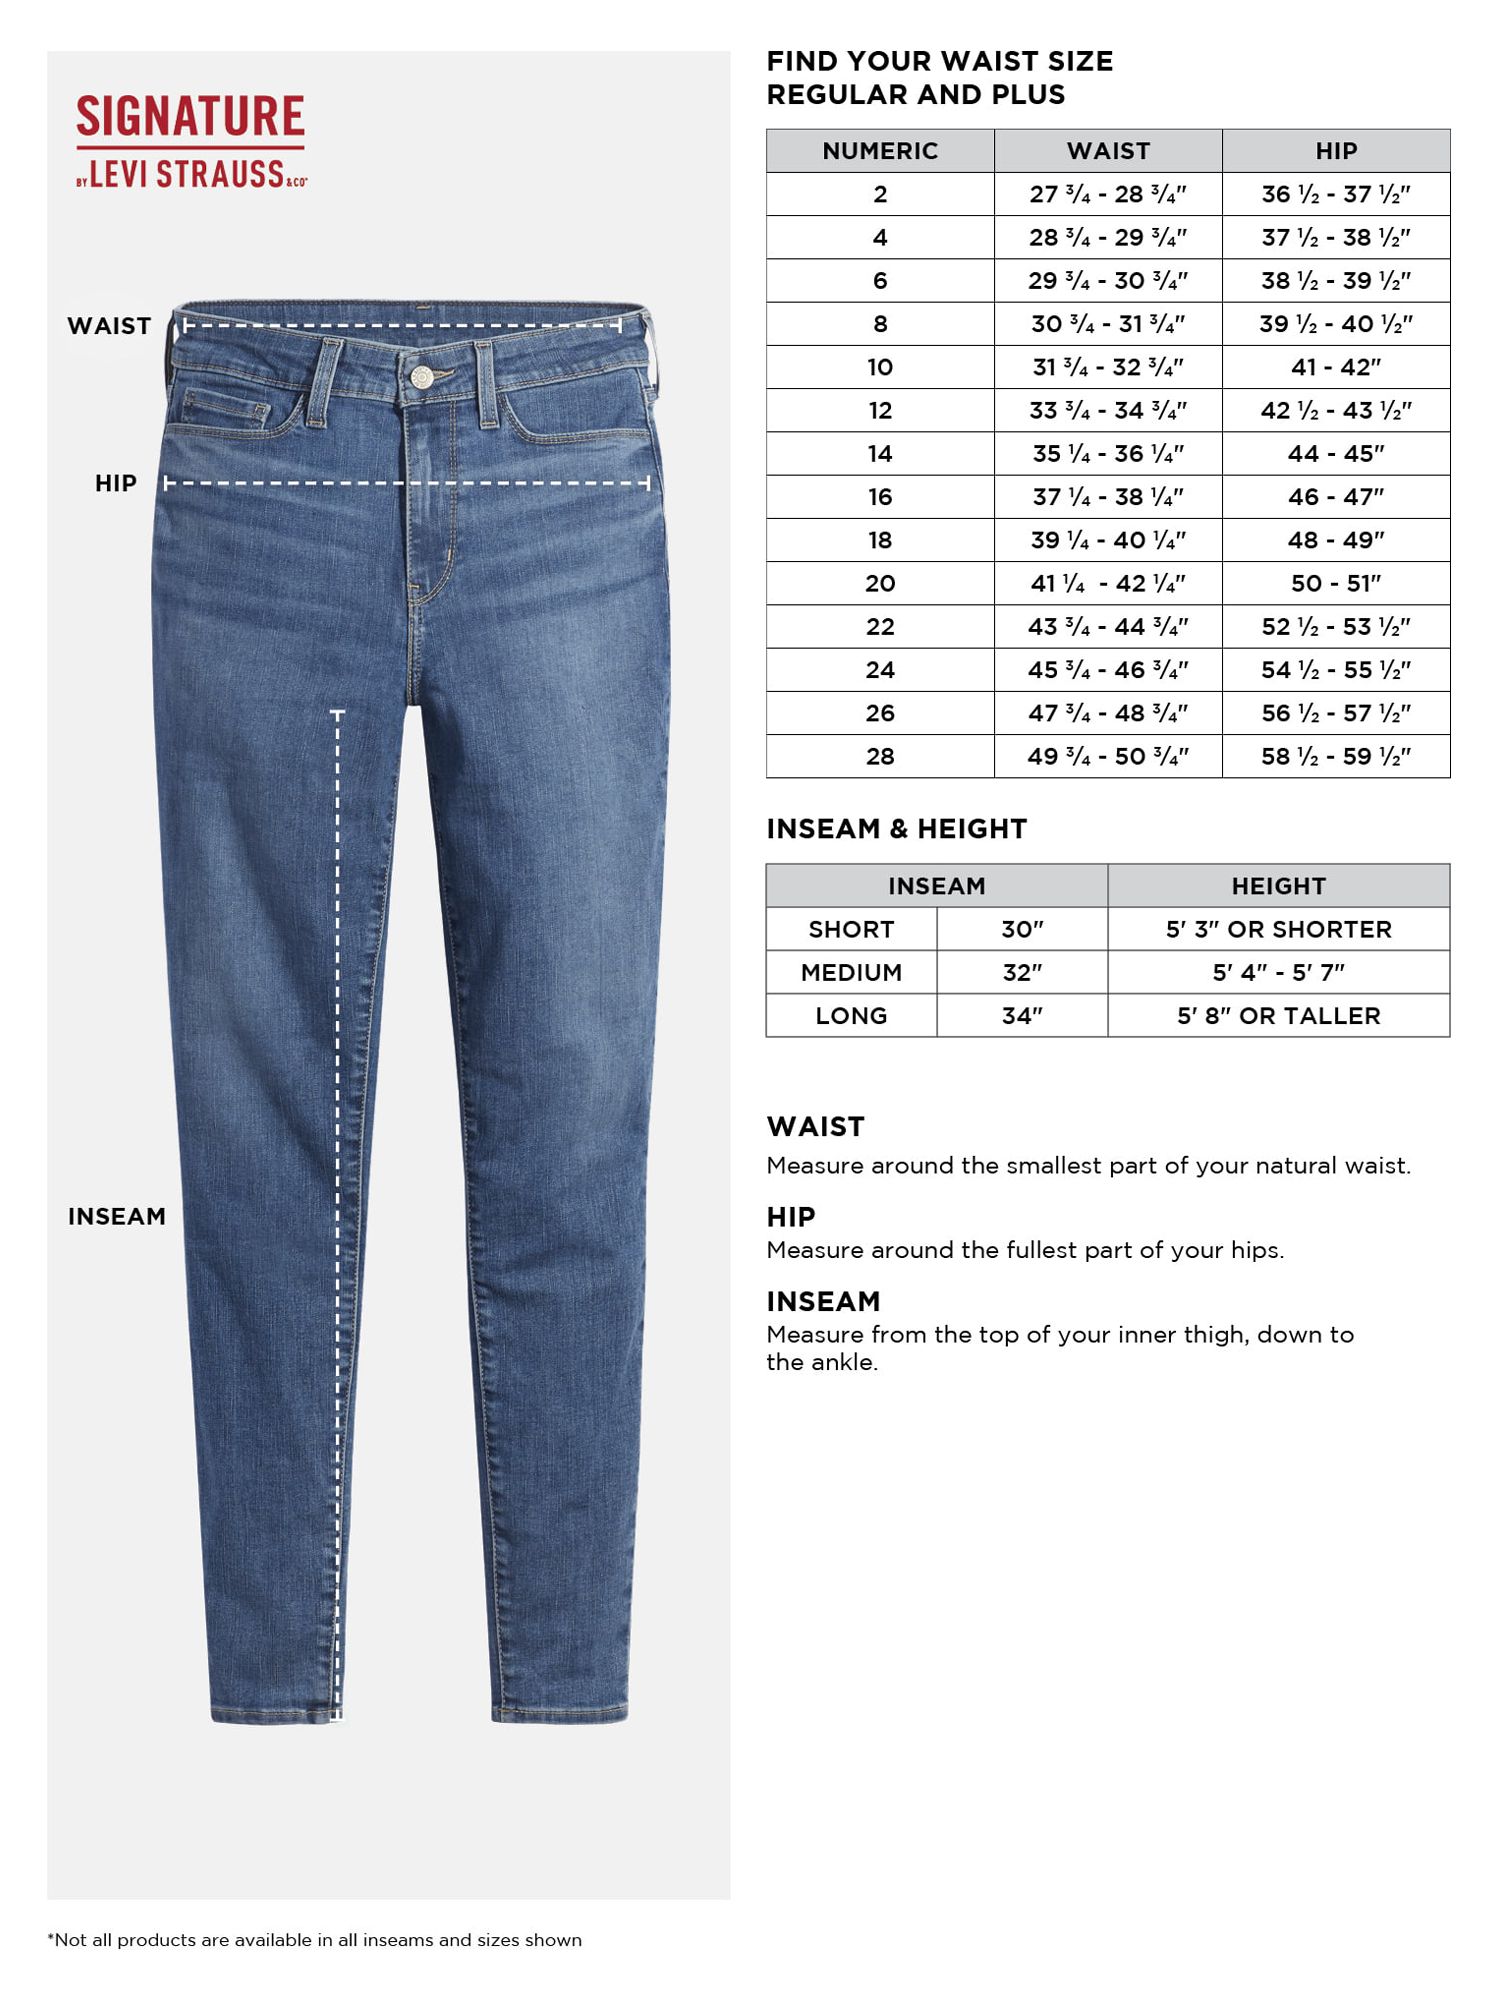 Signature by Levi Strauss & Co. Women's and Women's Plus Modern Bootcut Jeans - image 3 of 7